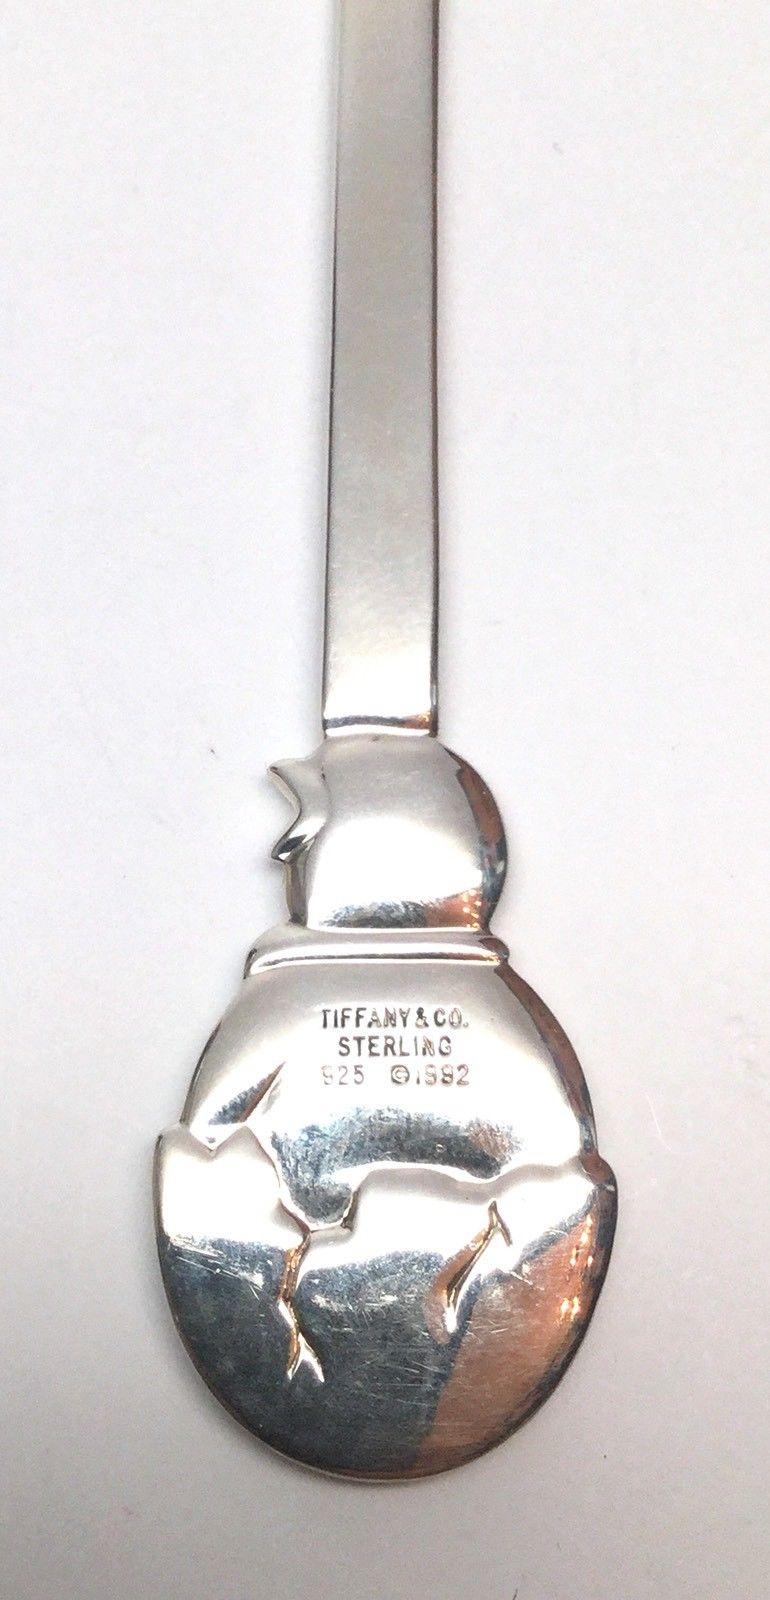 tiffany & co. sterling silver baby spoon